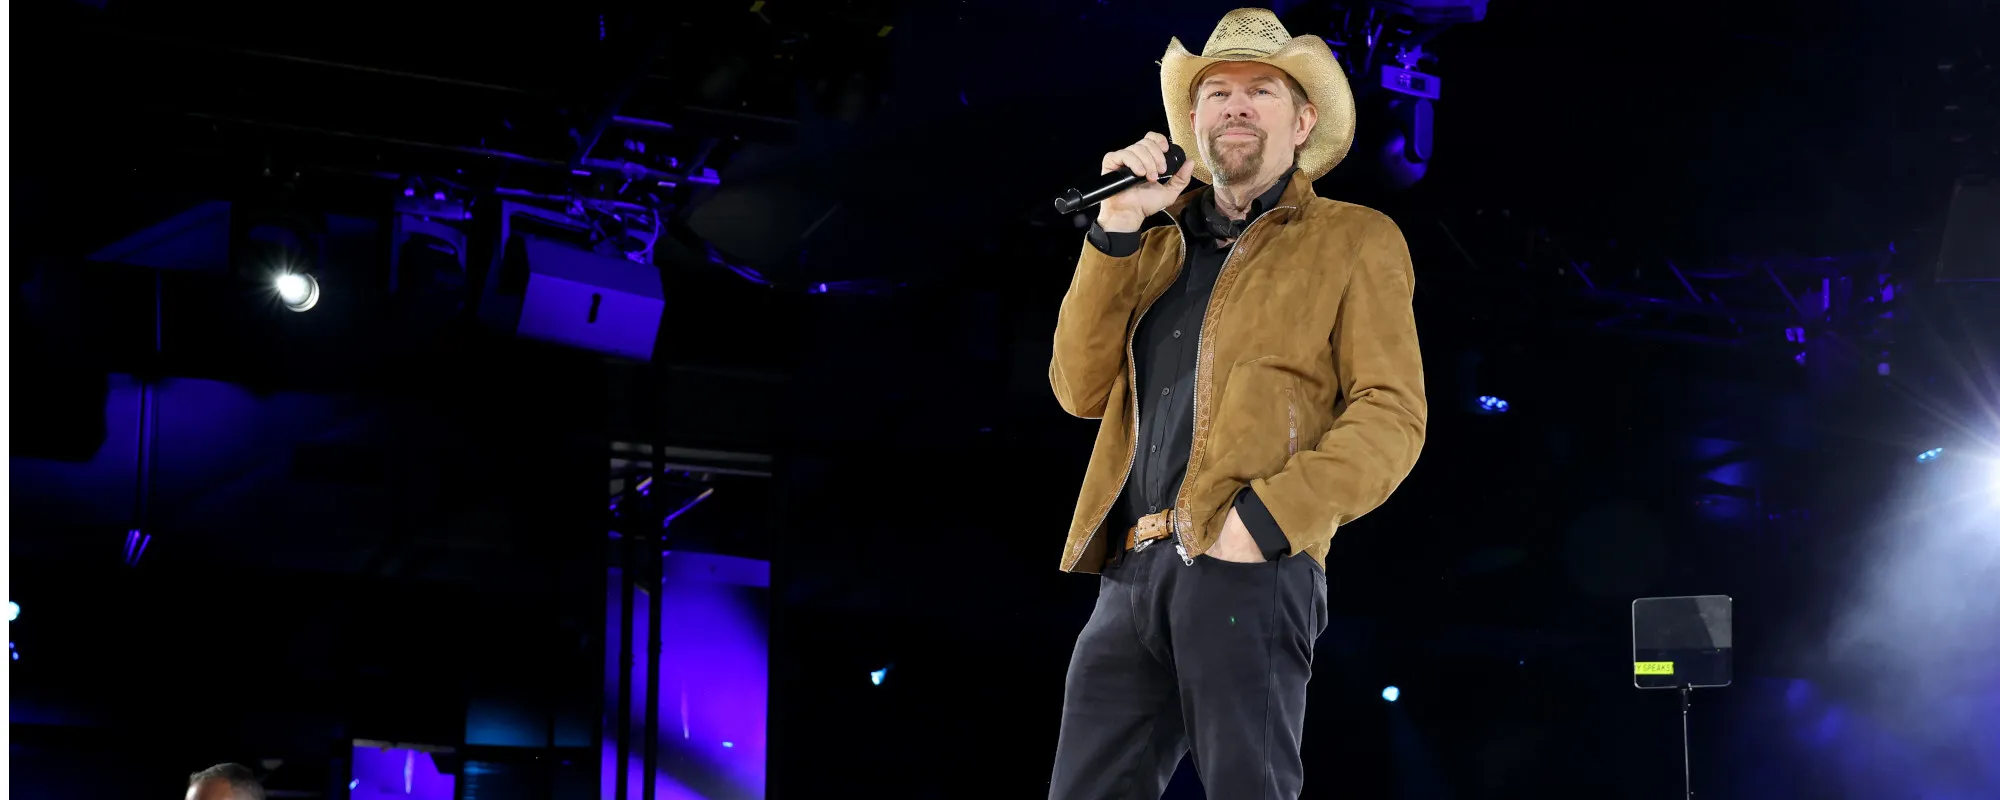 TOBY KEITH ACQUIRES ICONIC FISHING BRAND LUCK E STRIKE — Welcome